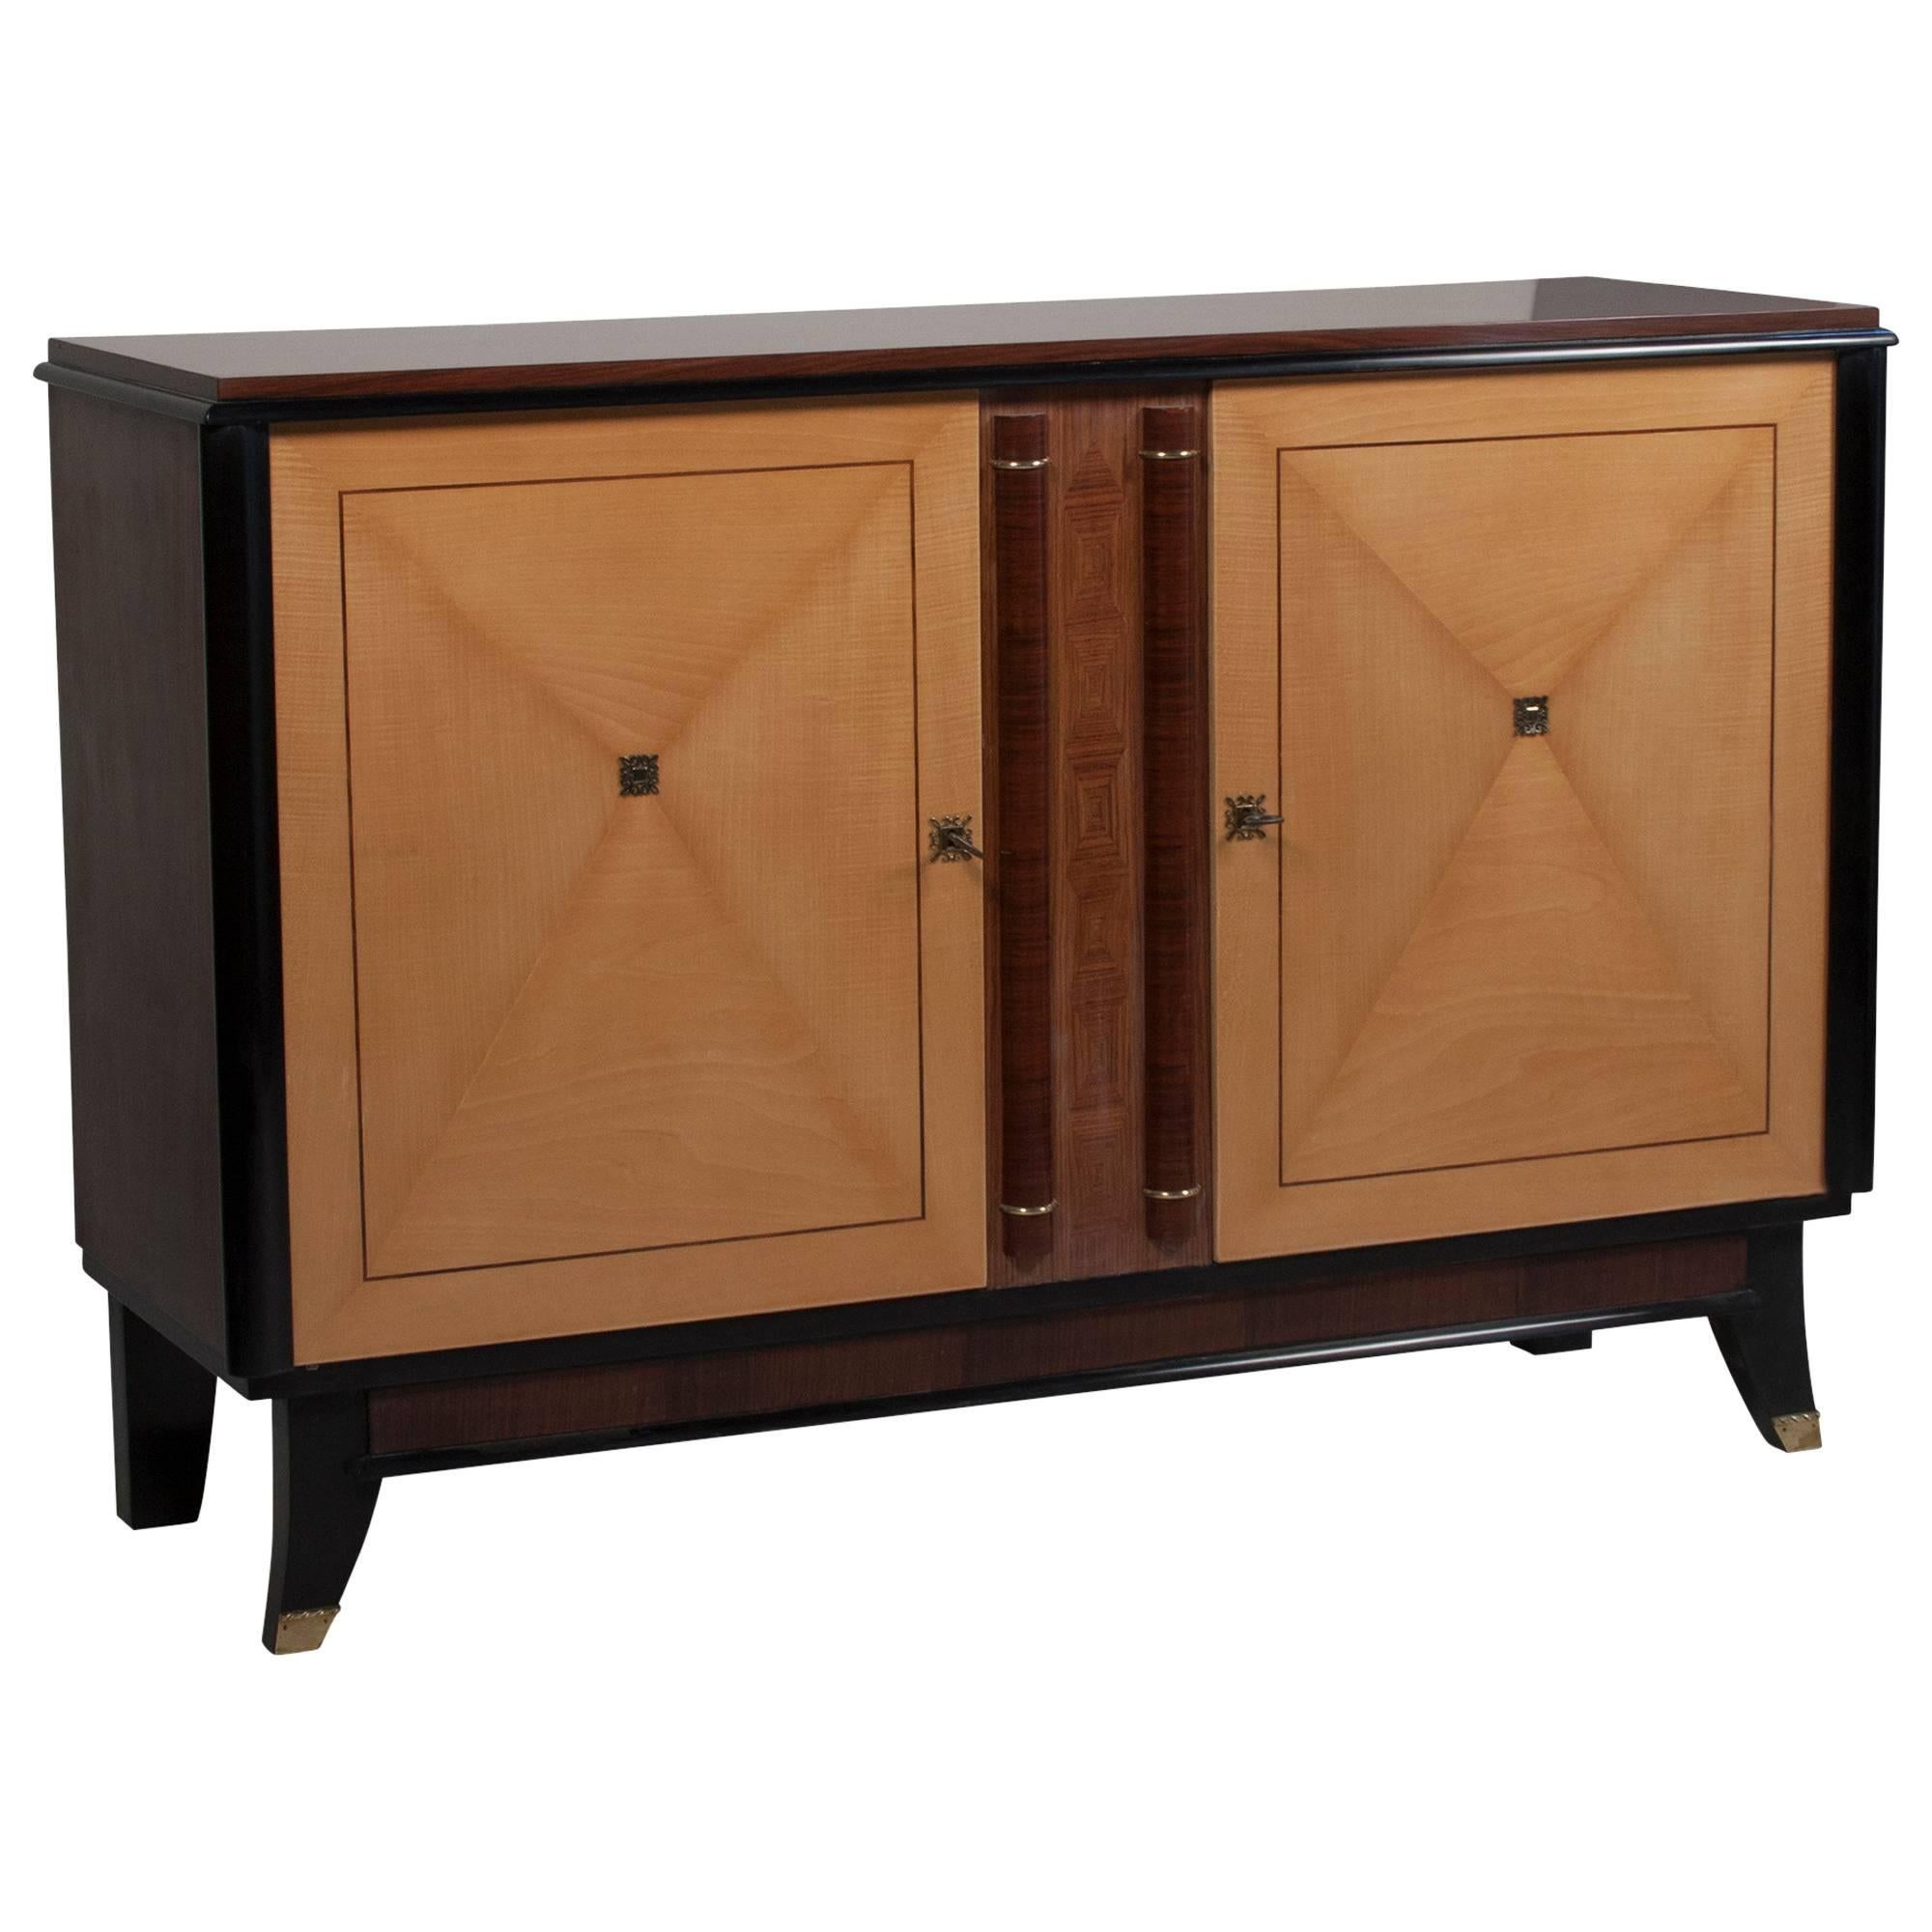 French 1940s Two-Door Cabinet